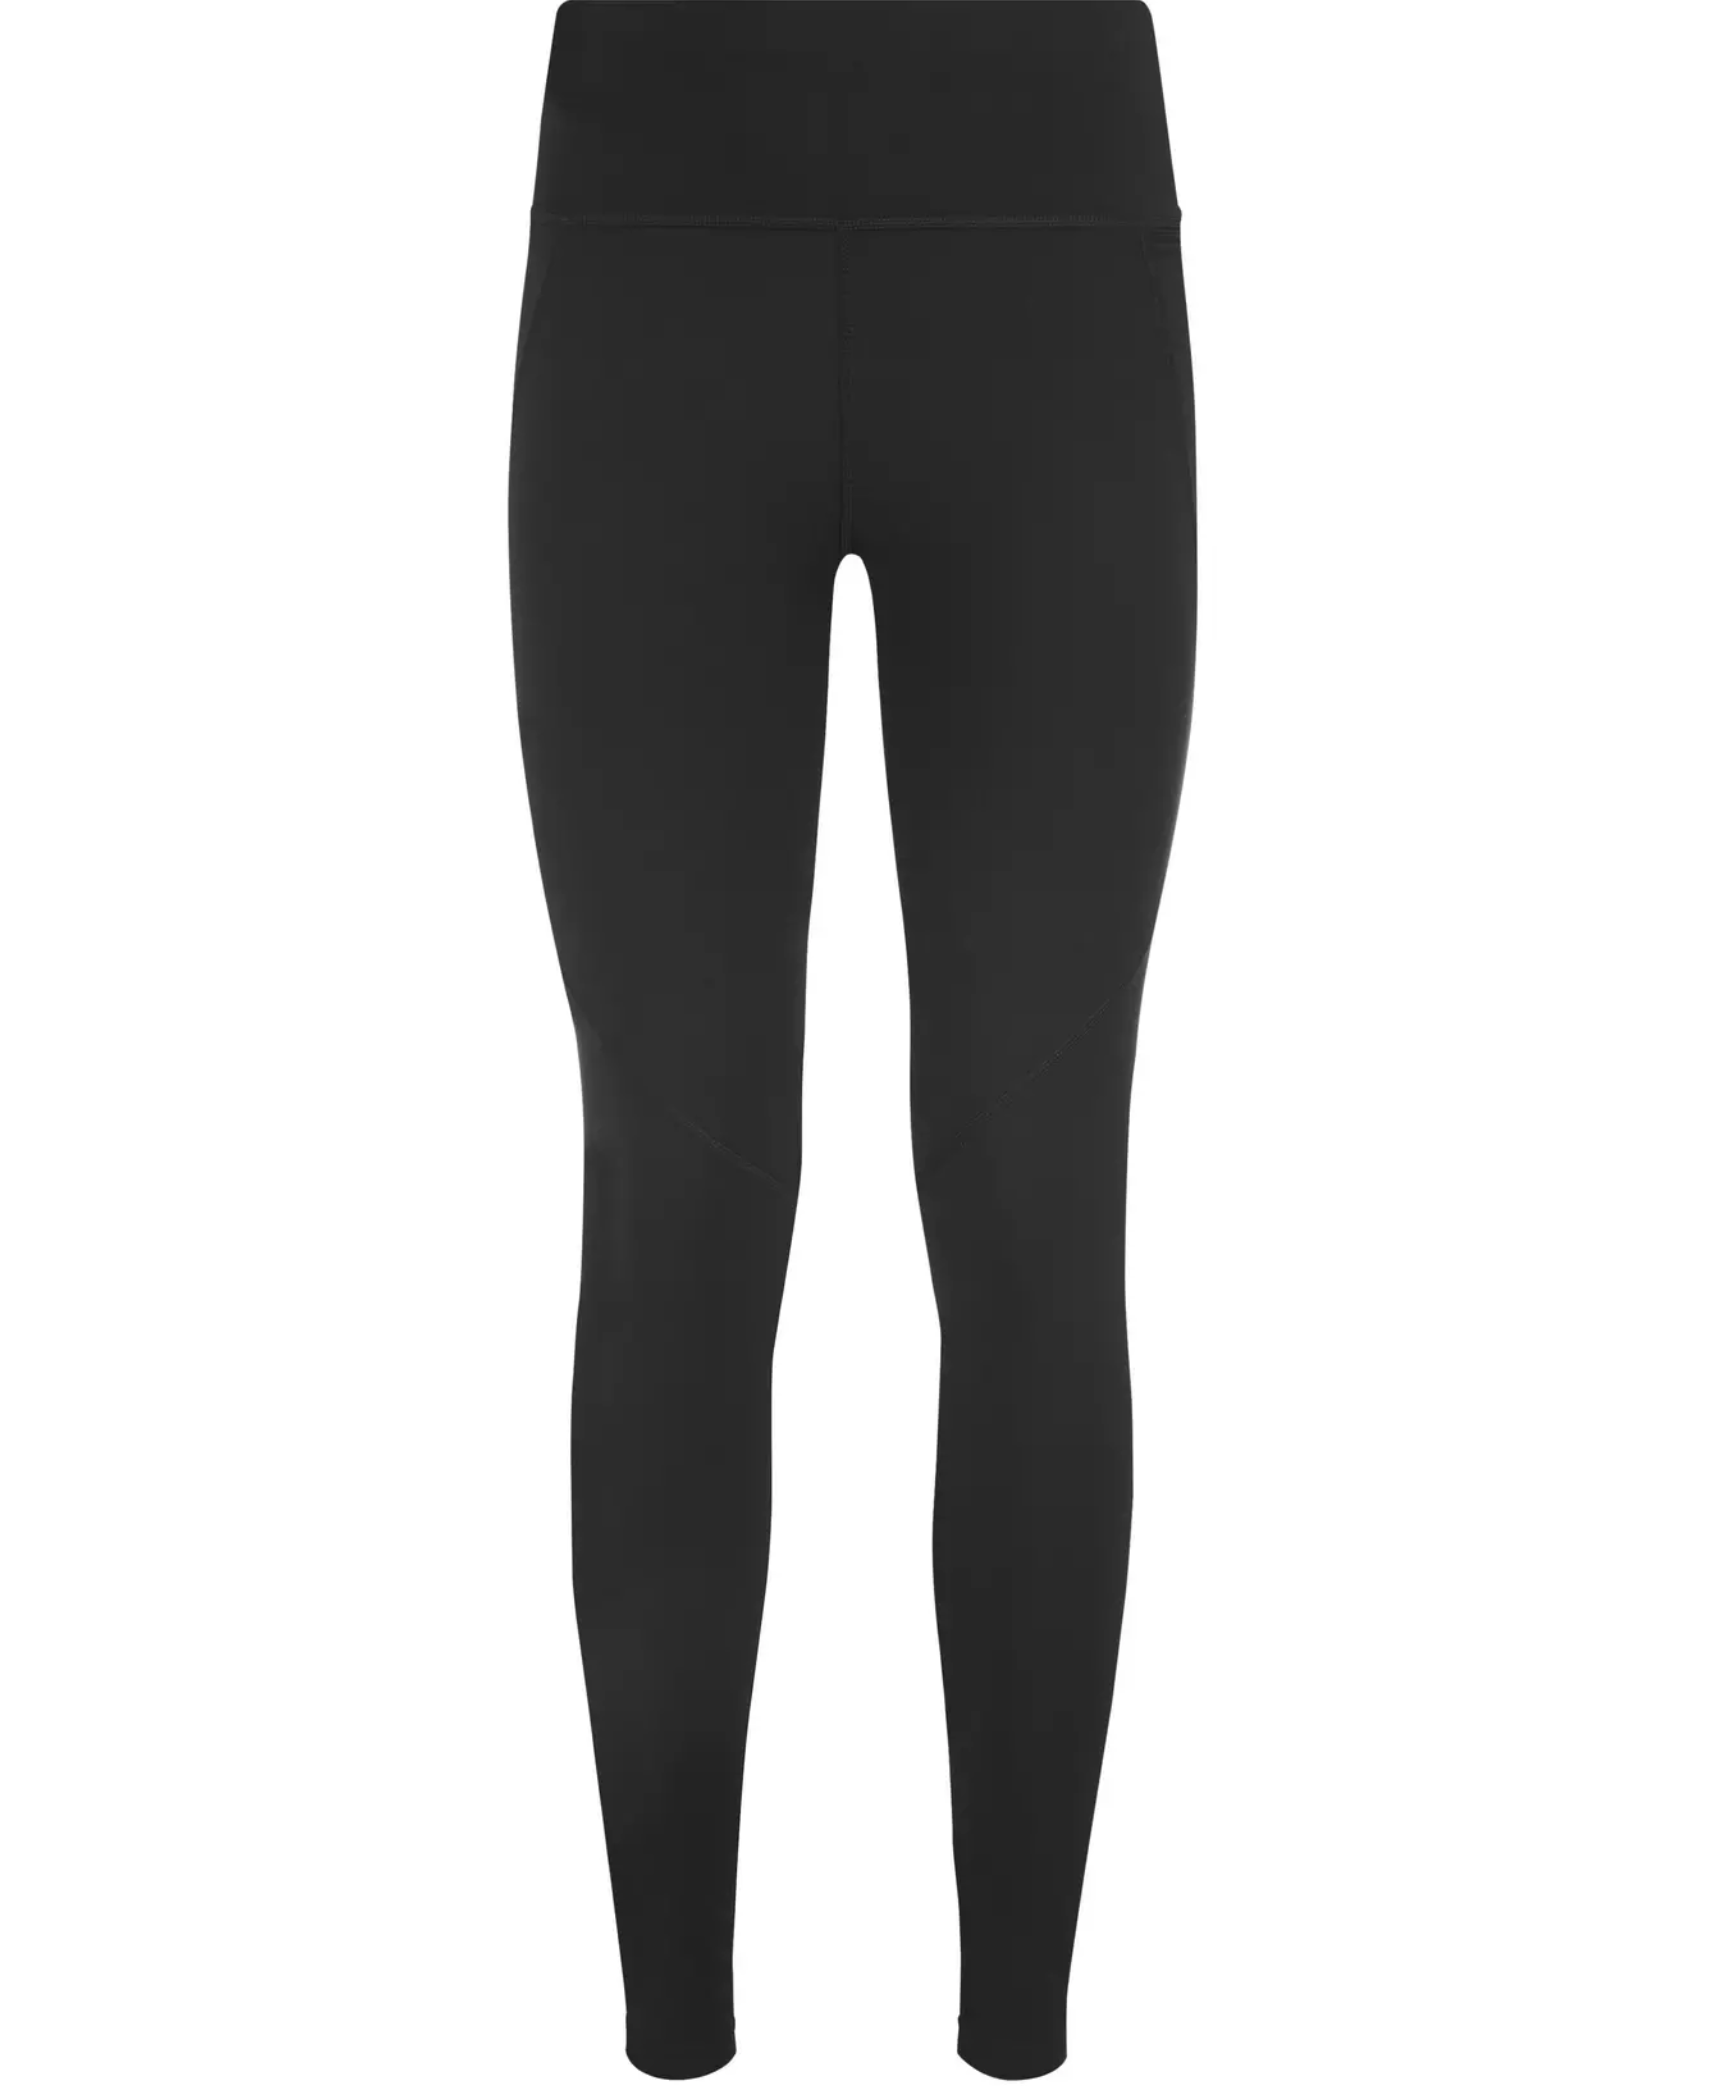 Best gym leggings: 5 top picks for effective workouts | Real Homes